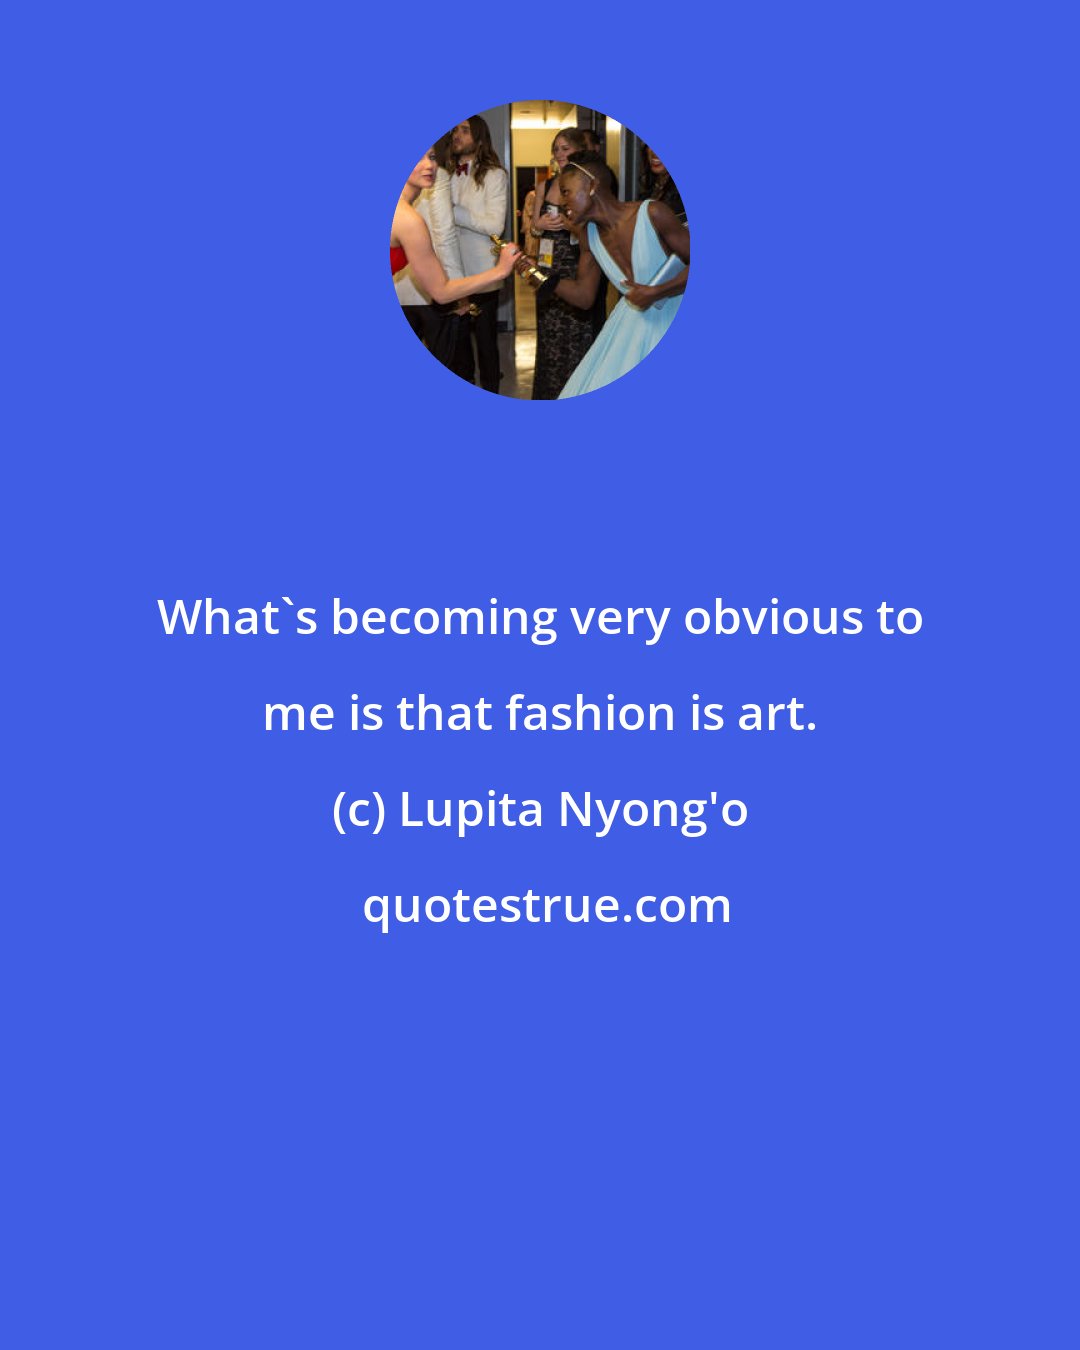 Lupita Nyong'o: What's becoming very obvious to me is that fashion is art.